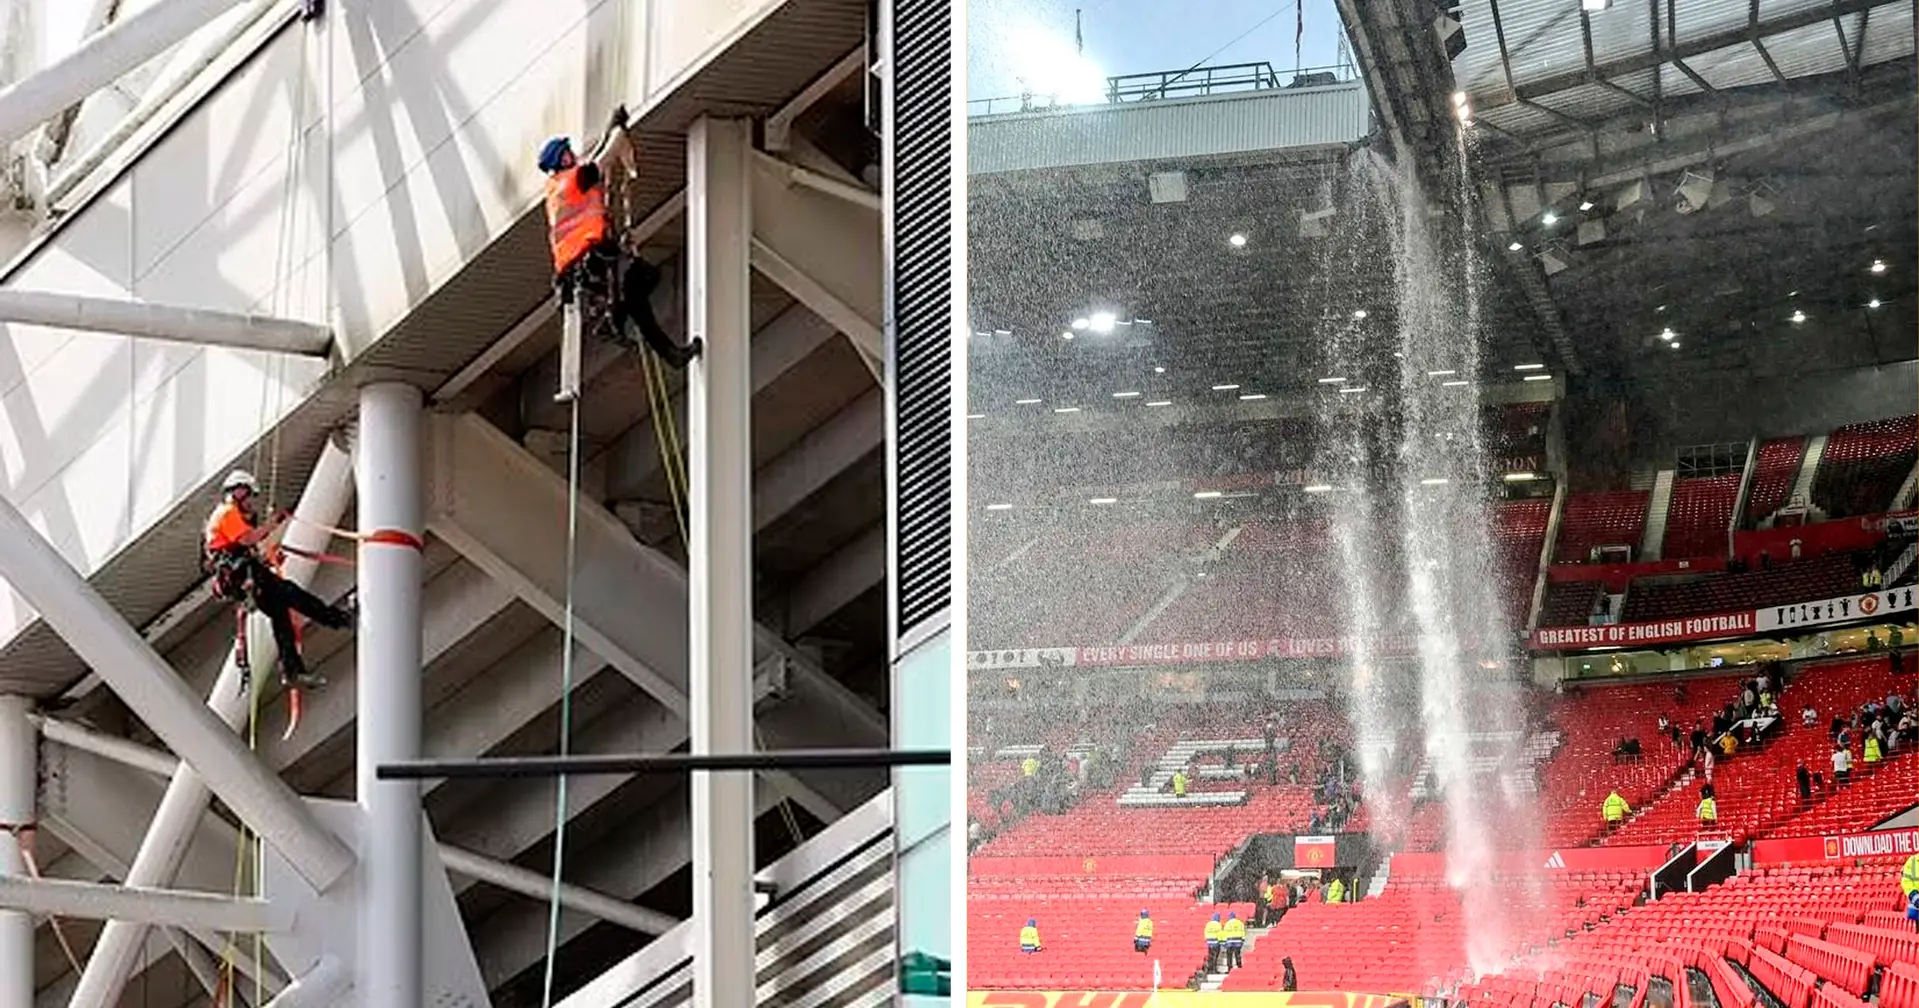 Workers spotted at Old Trafford today - they are not there to fix the leaky roof